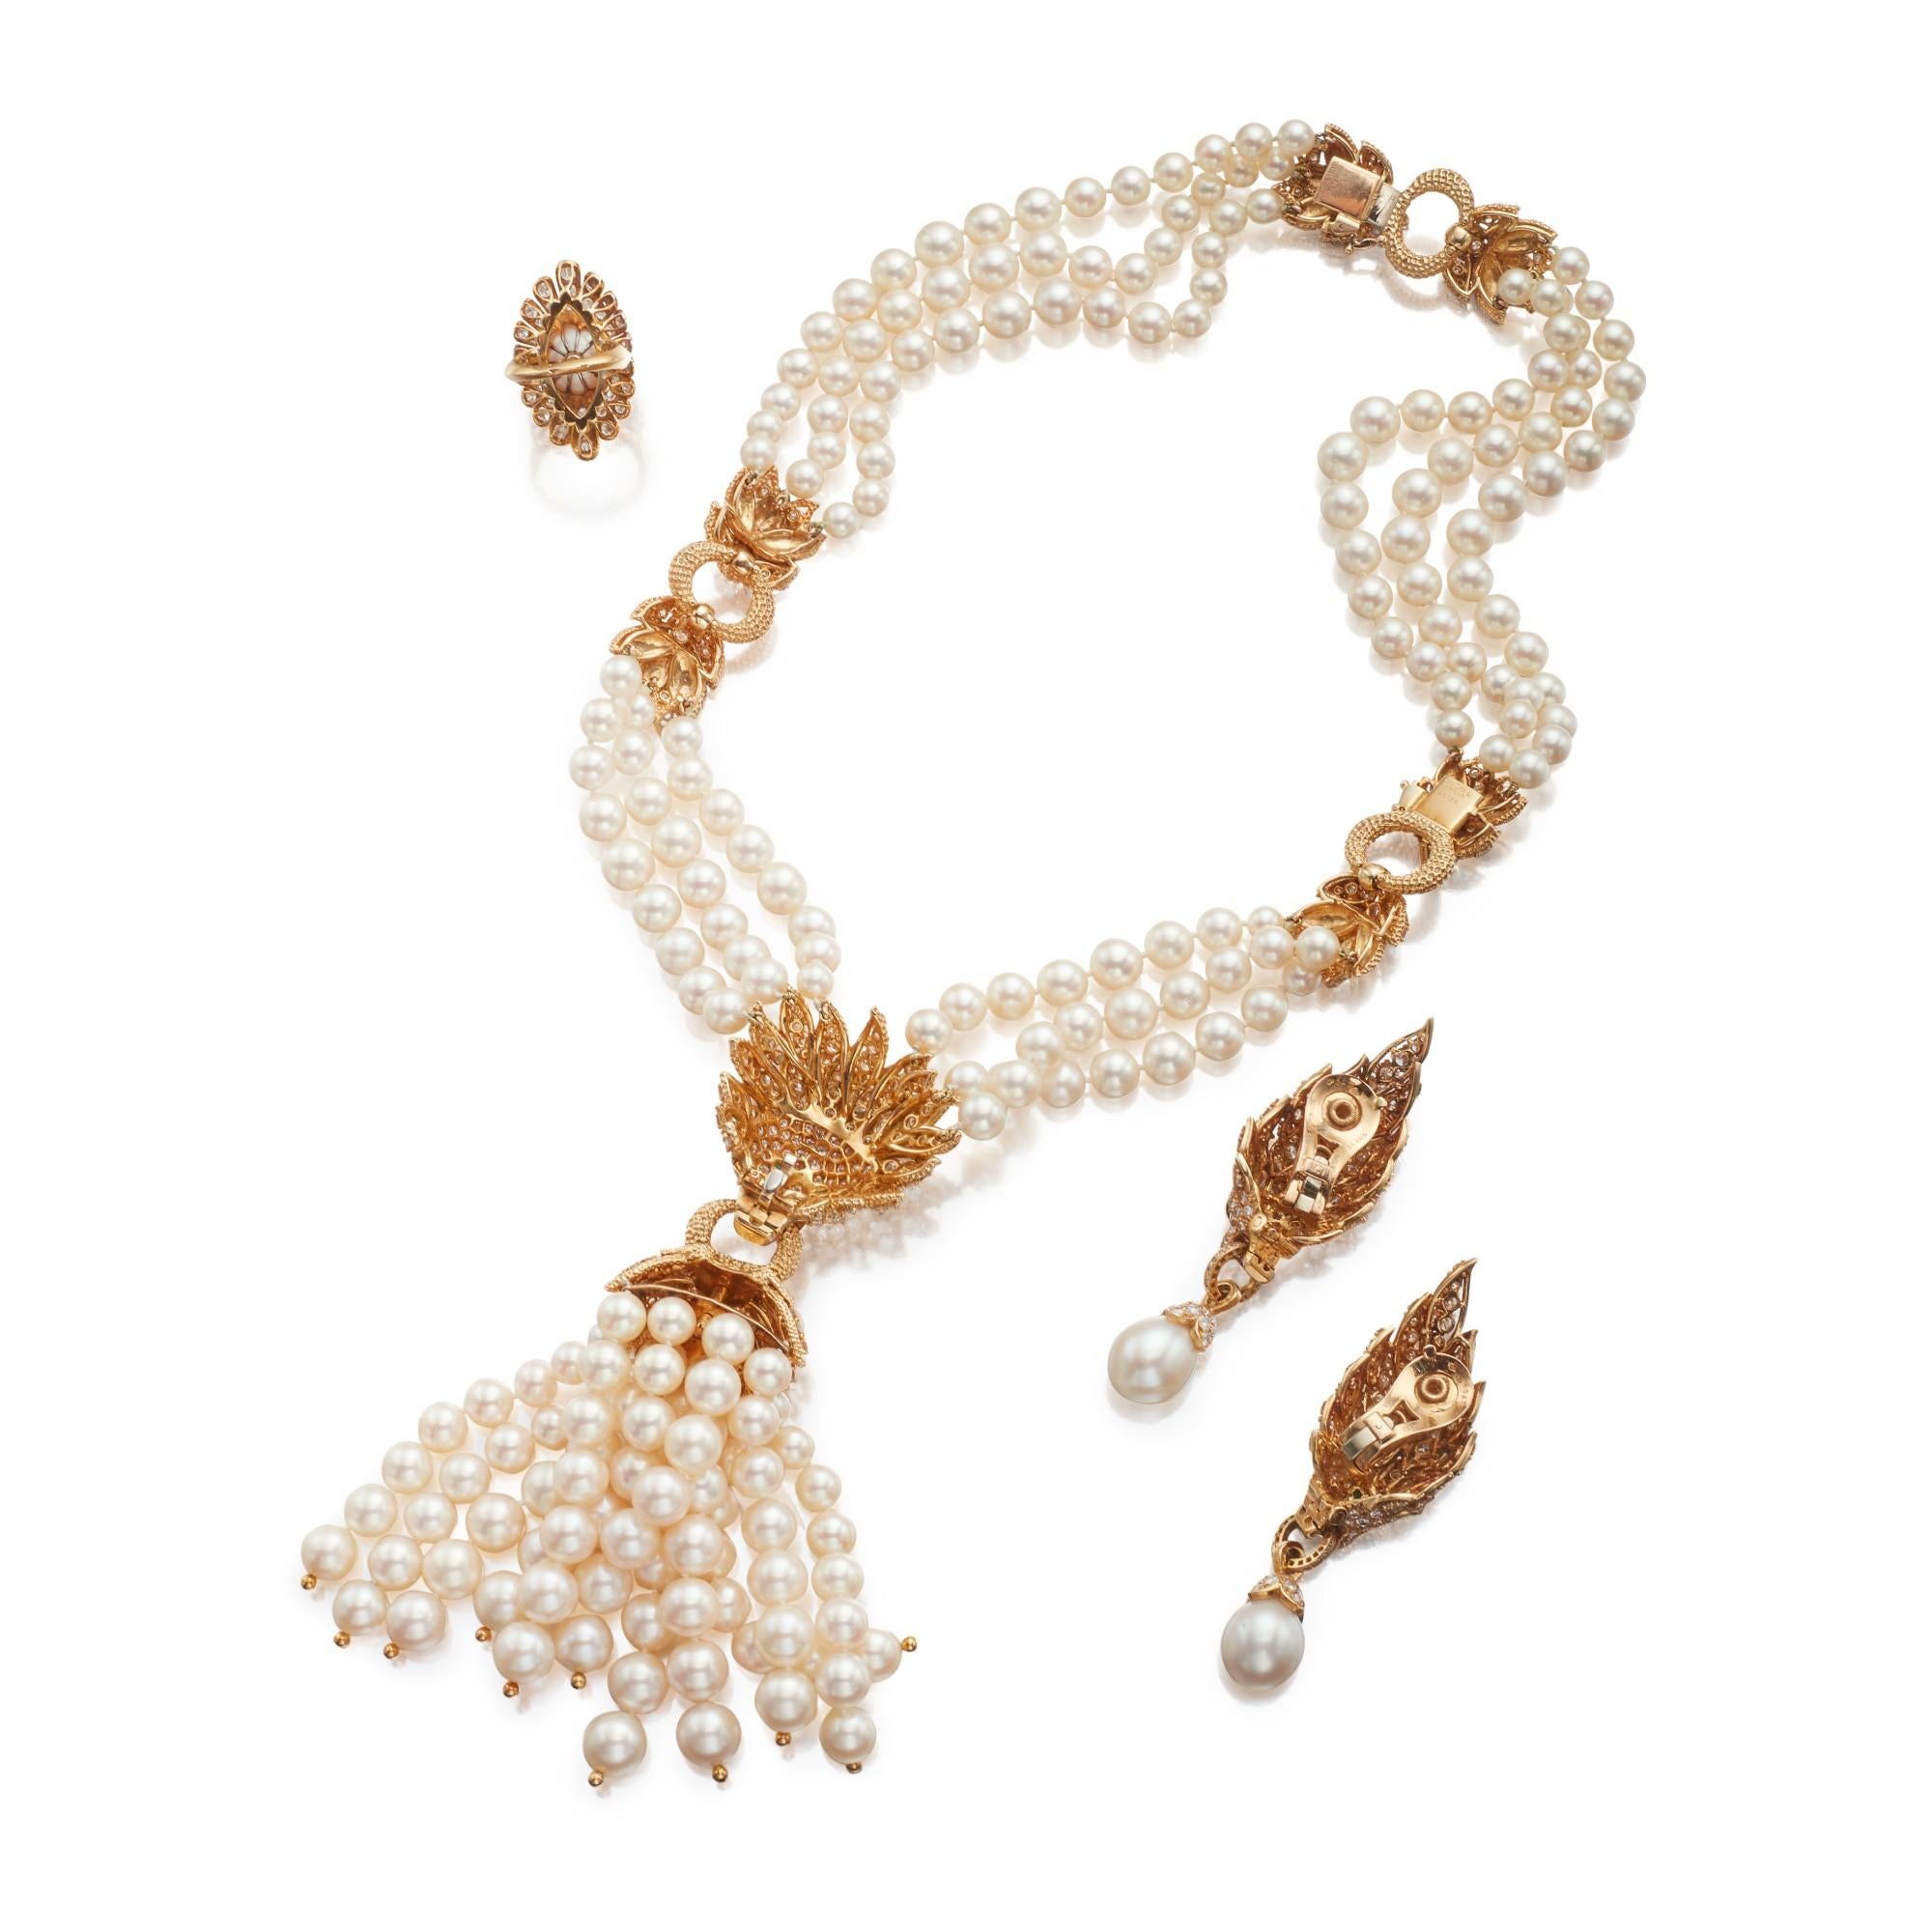 Iconic Van Cleef & Arpels Pearl and Diamond Lion Necklace, Earrings and Ring Set 1